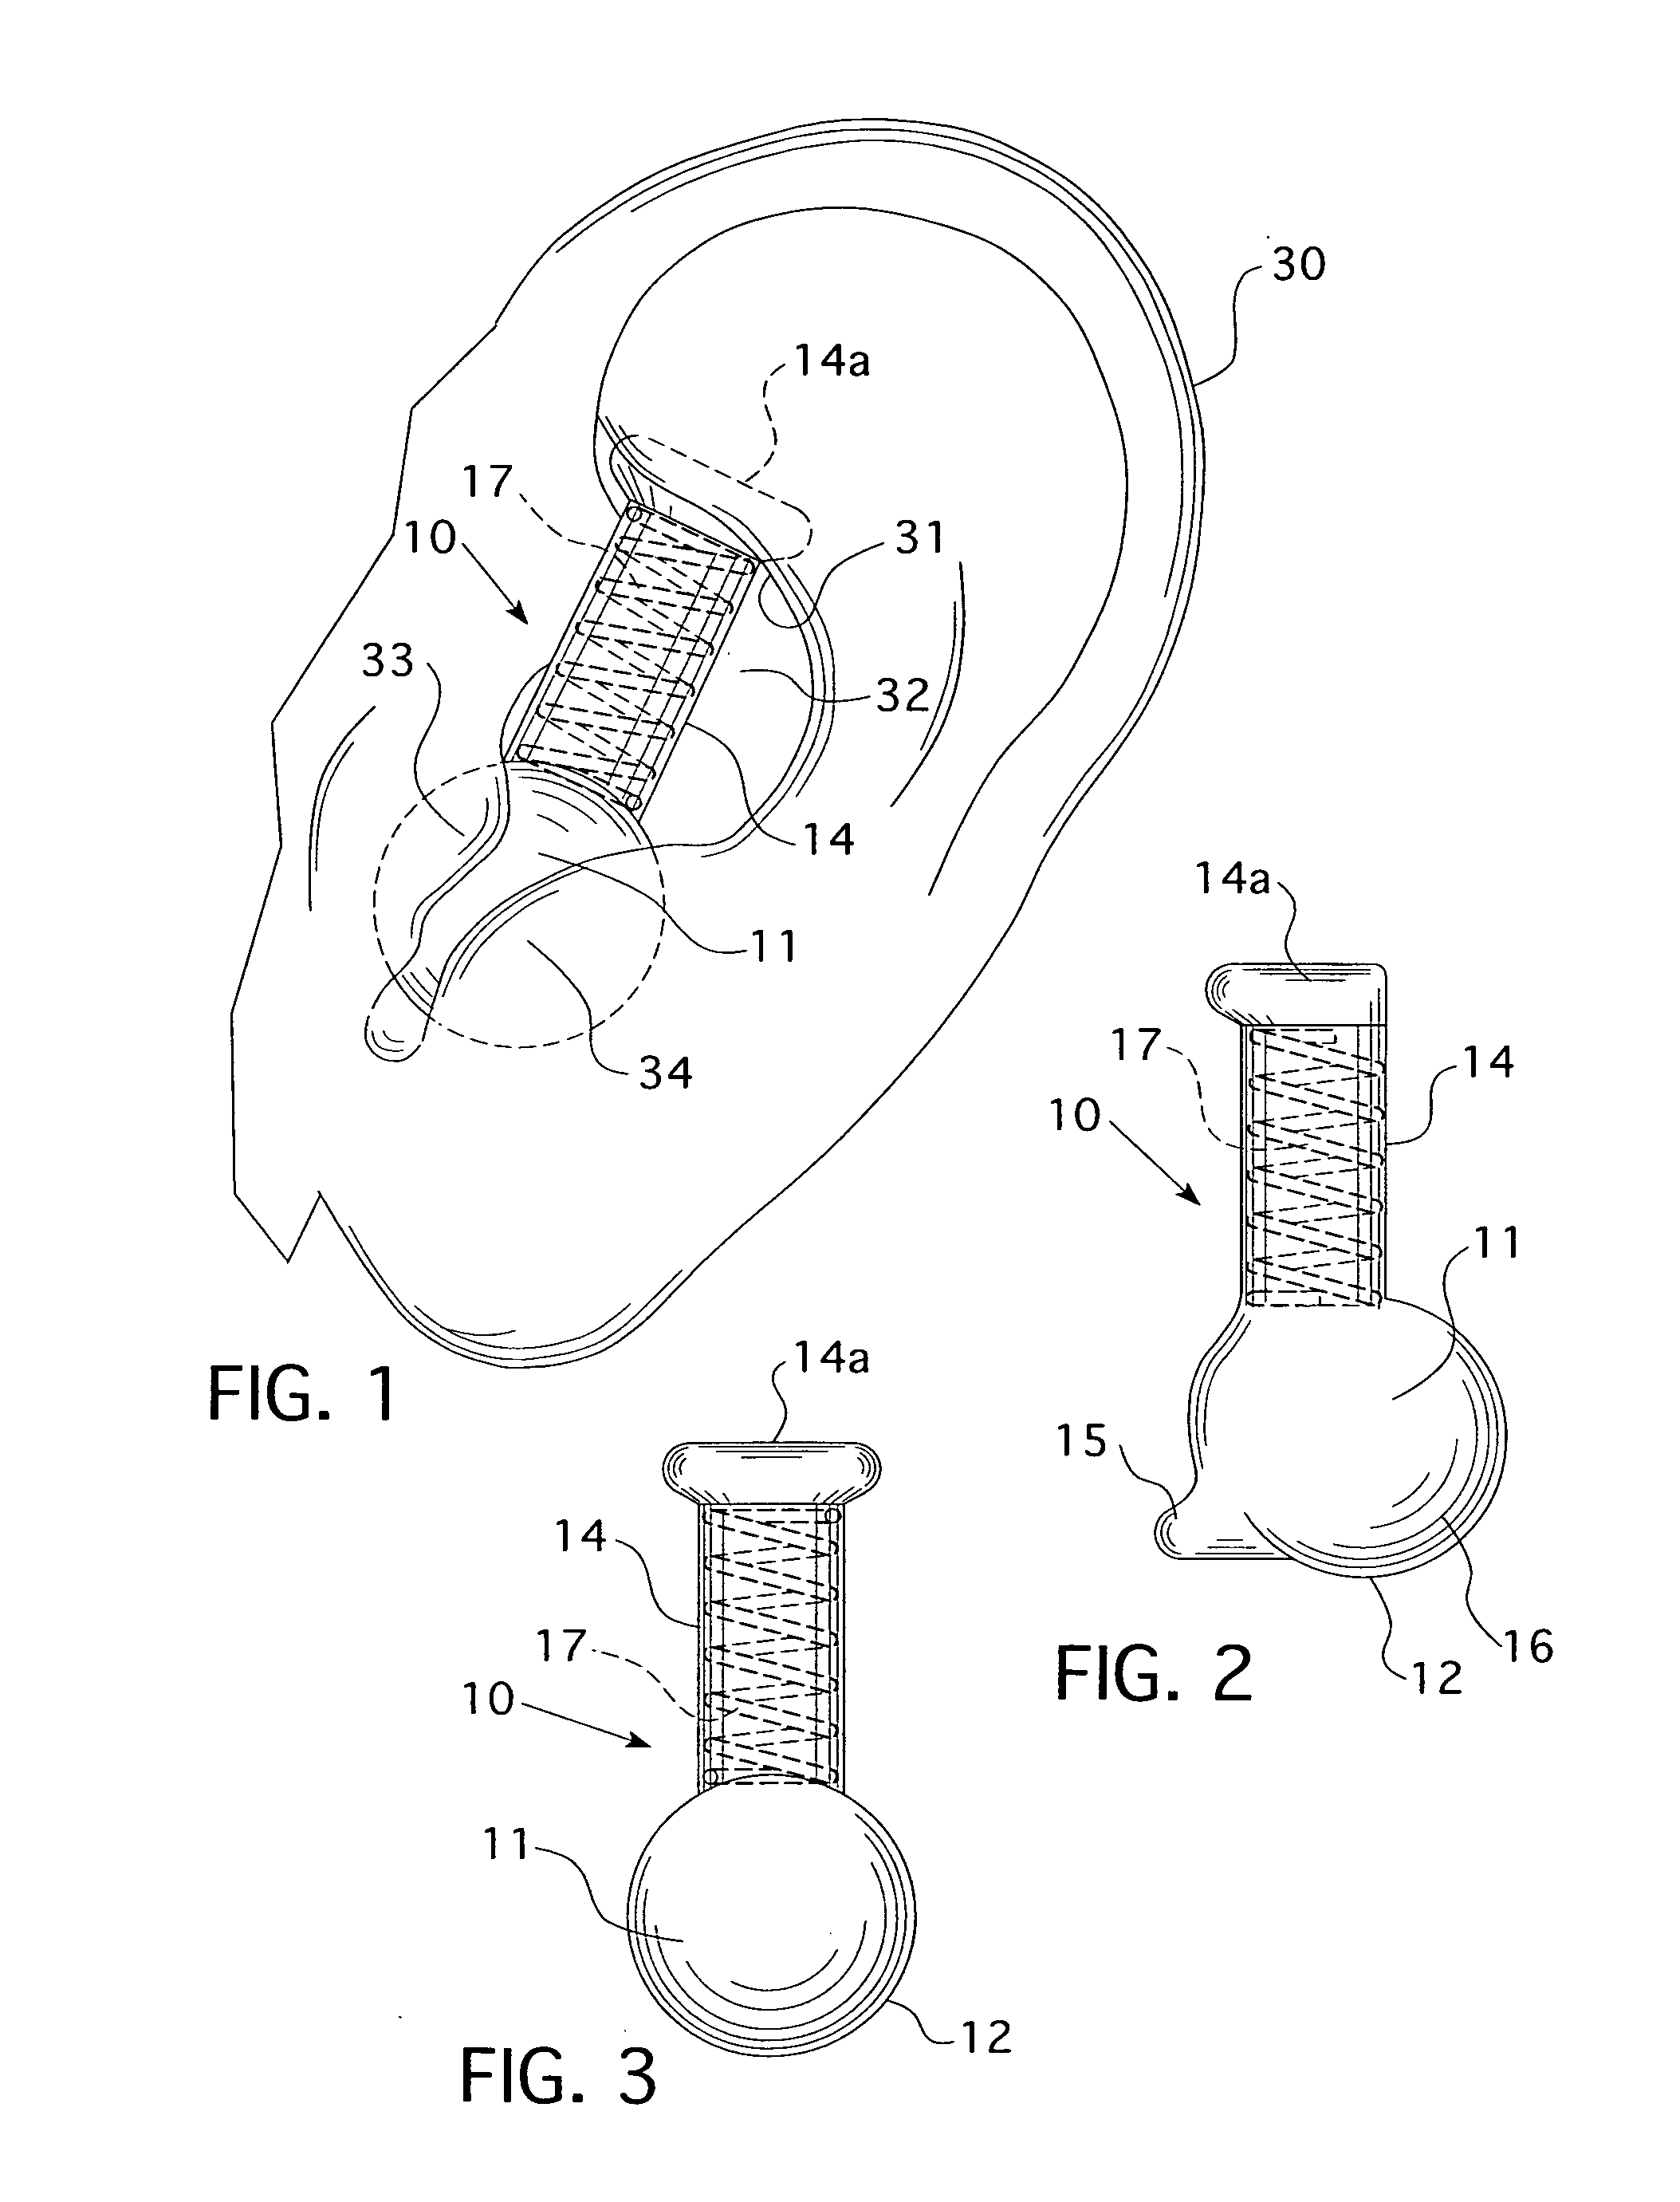 In ear communications device and stabilizer